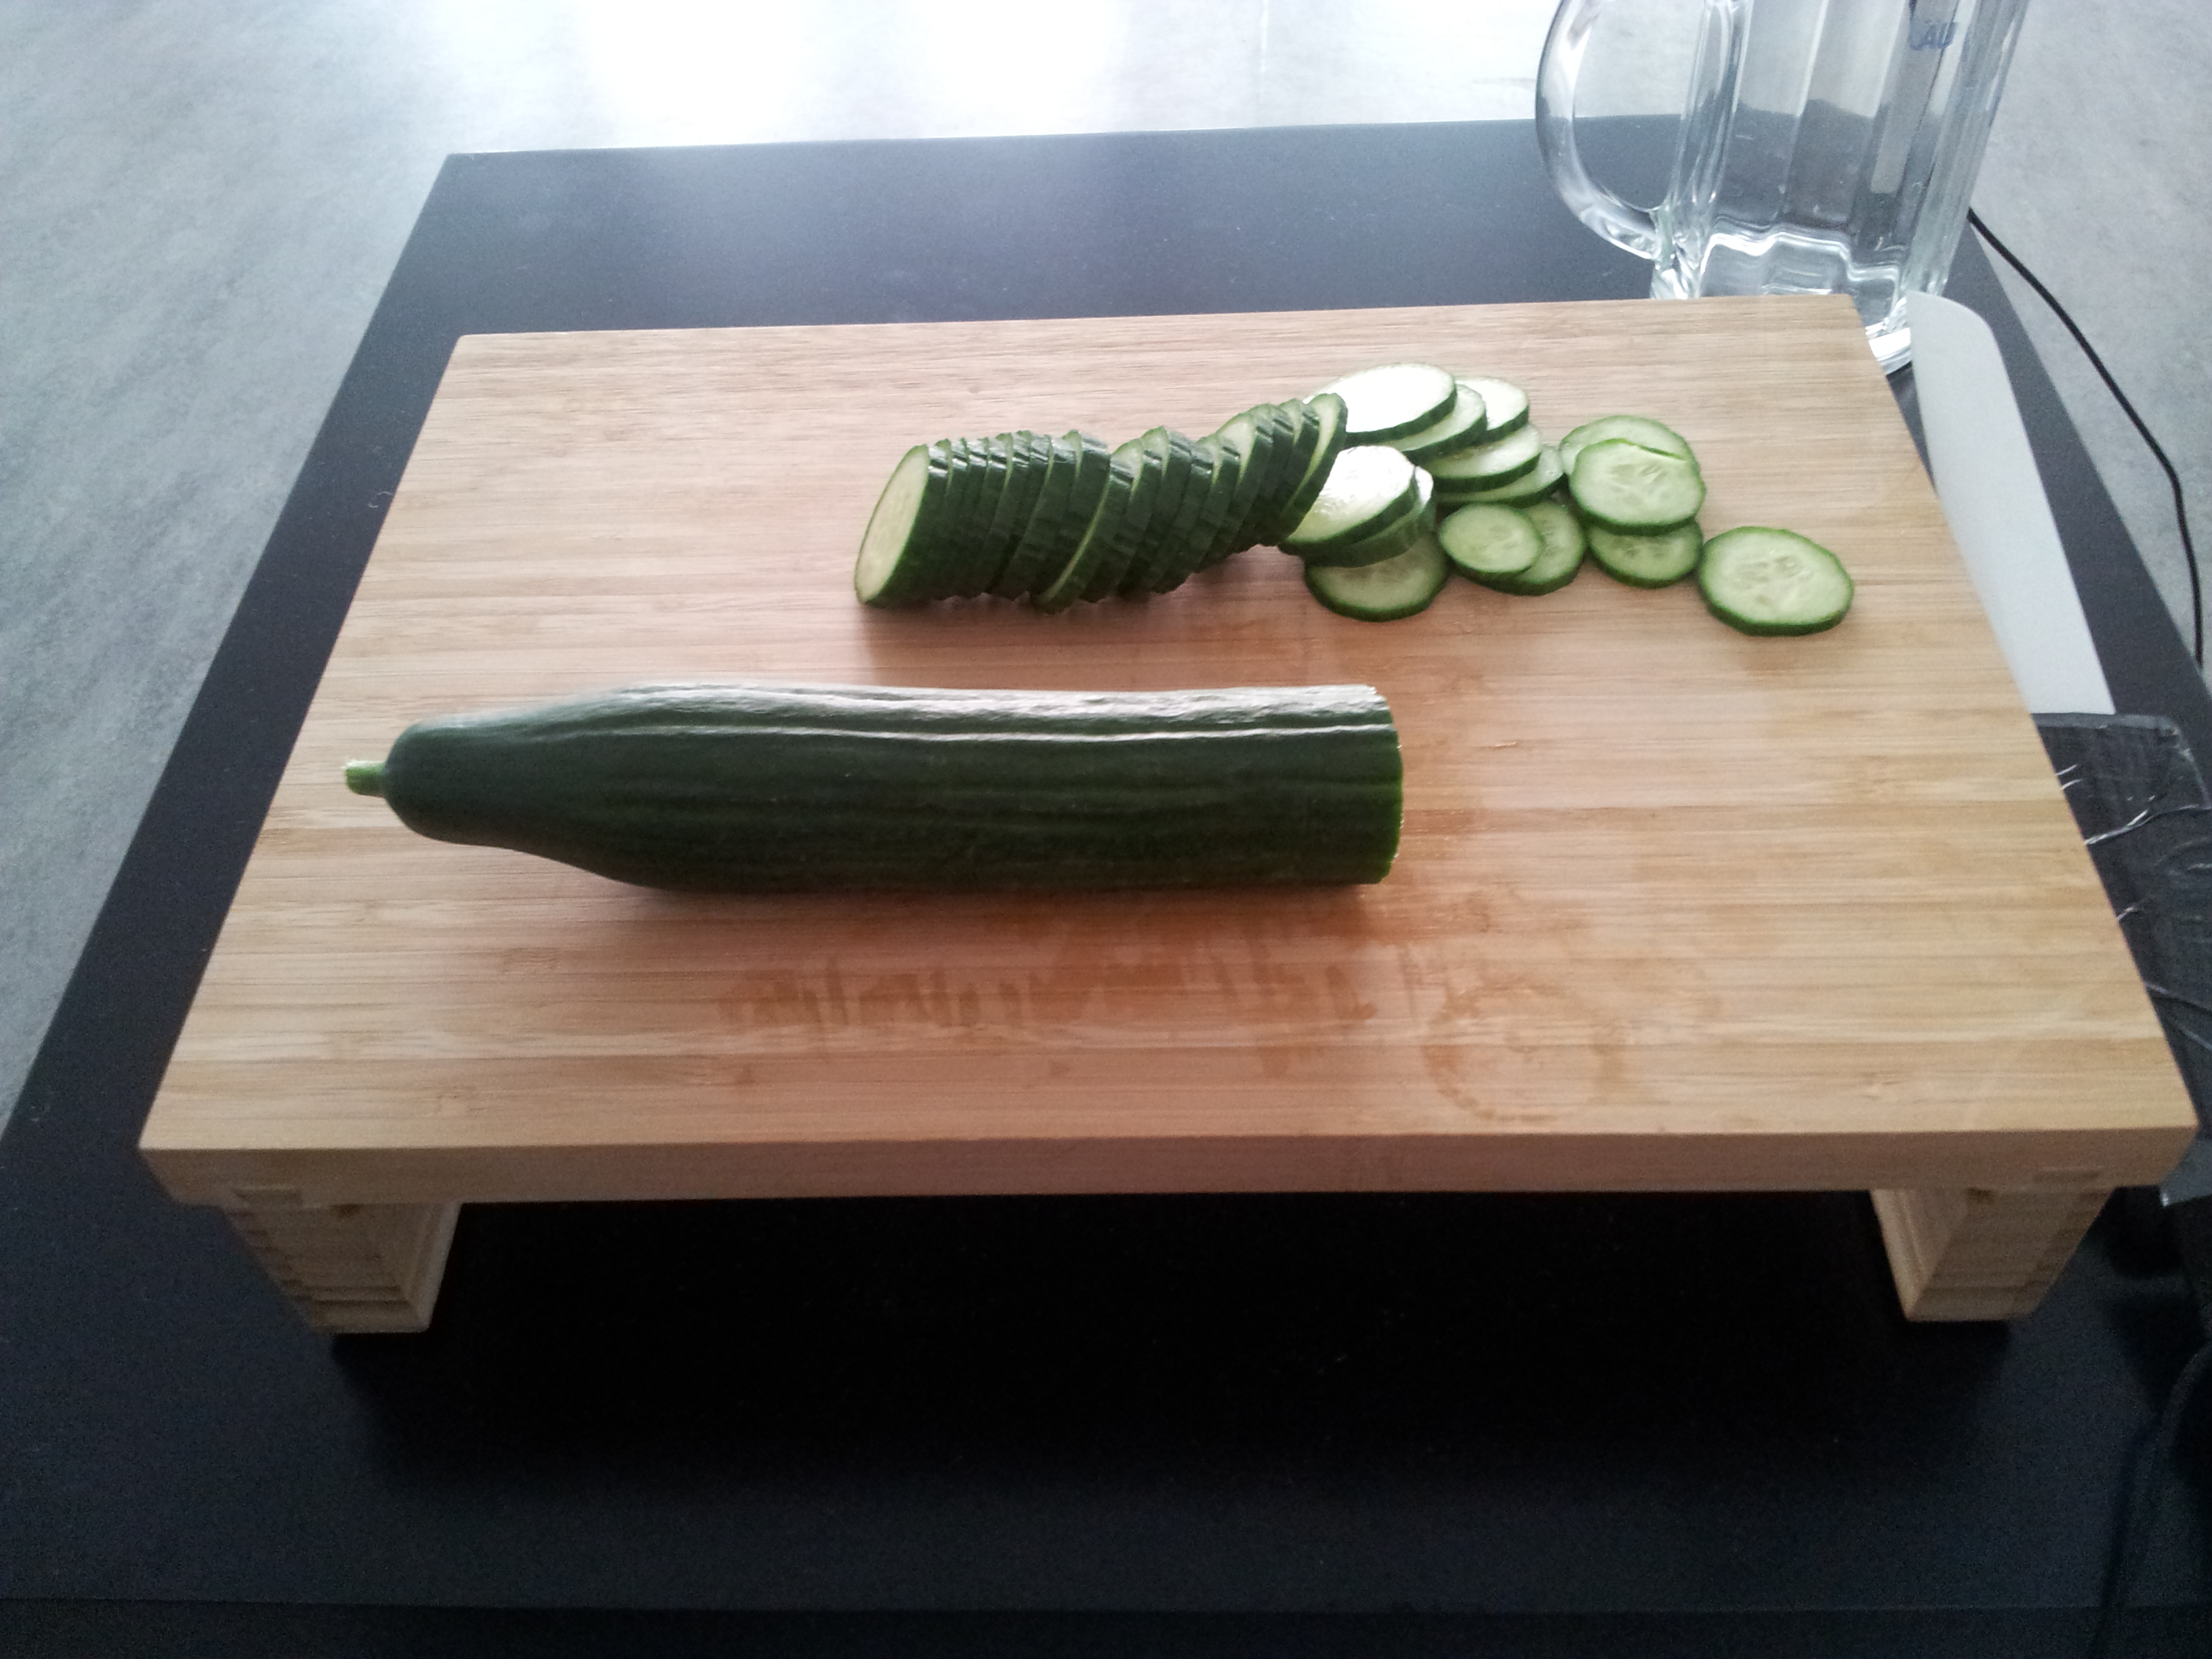 cucumber cutting setup (before second phase)